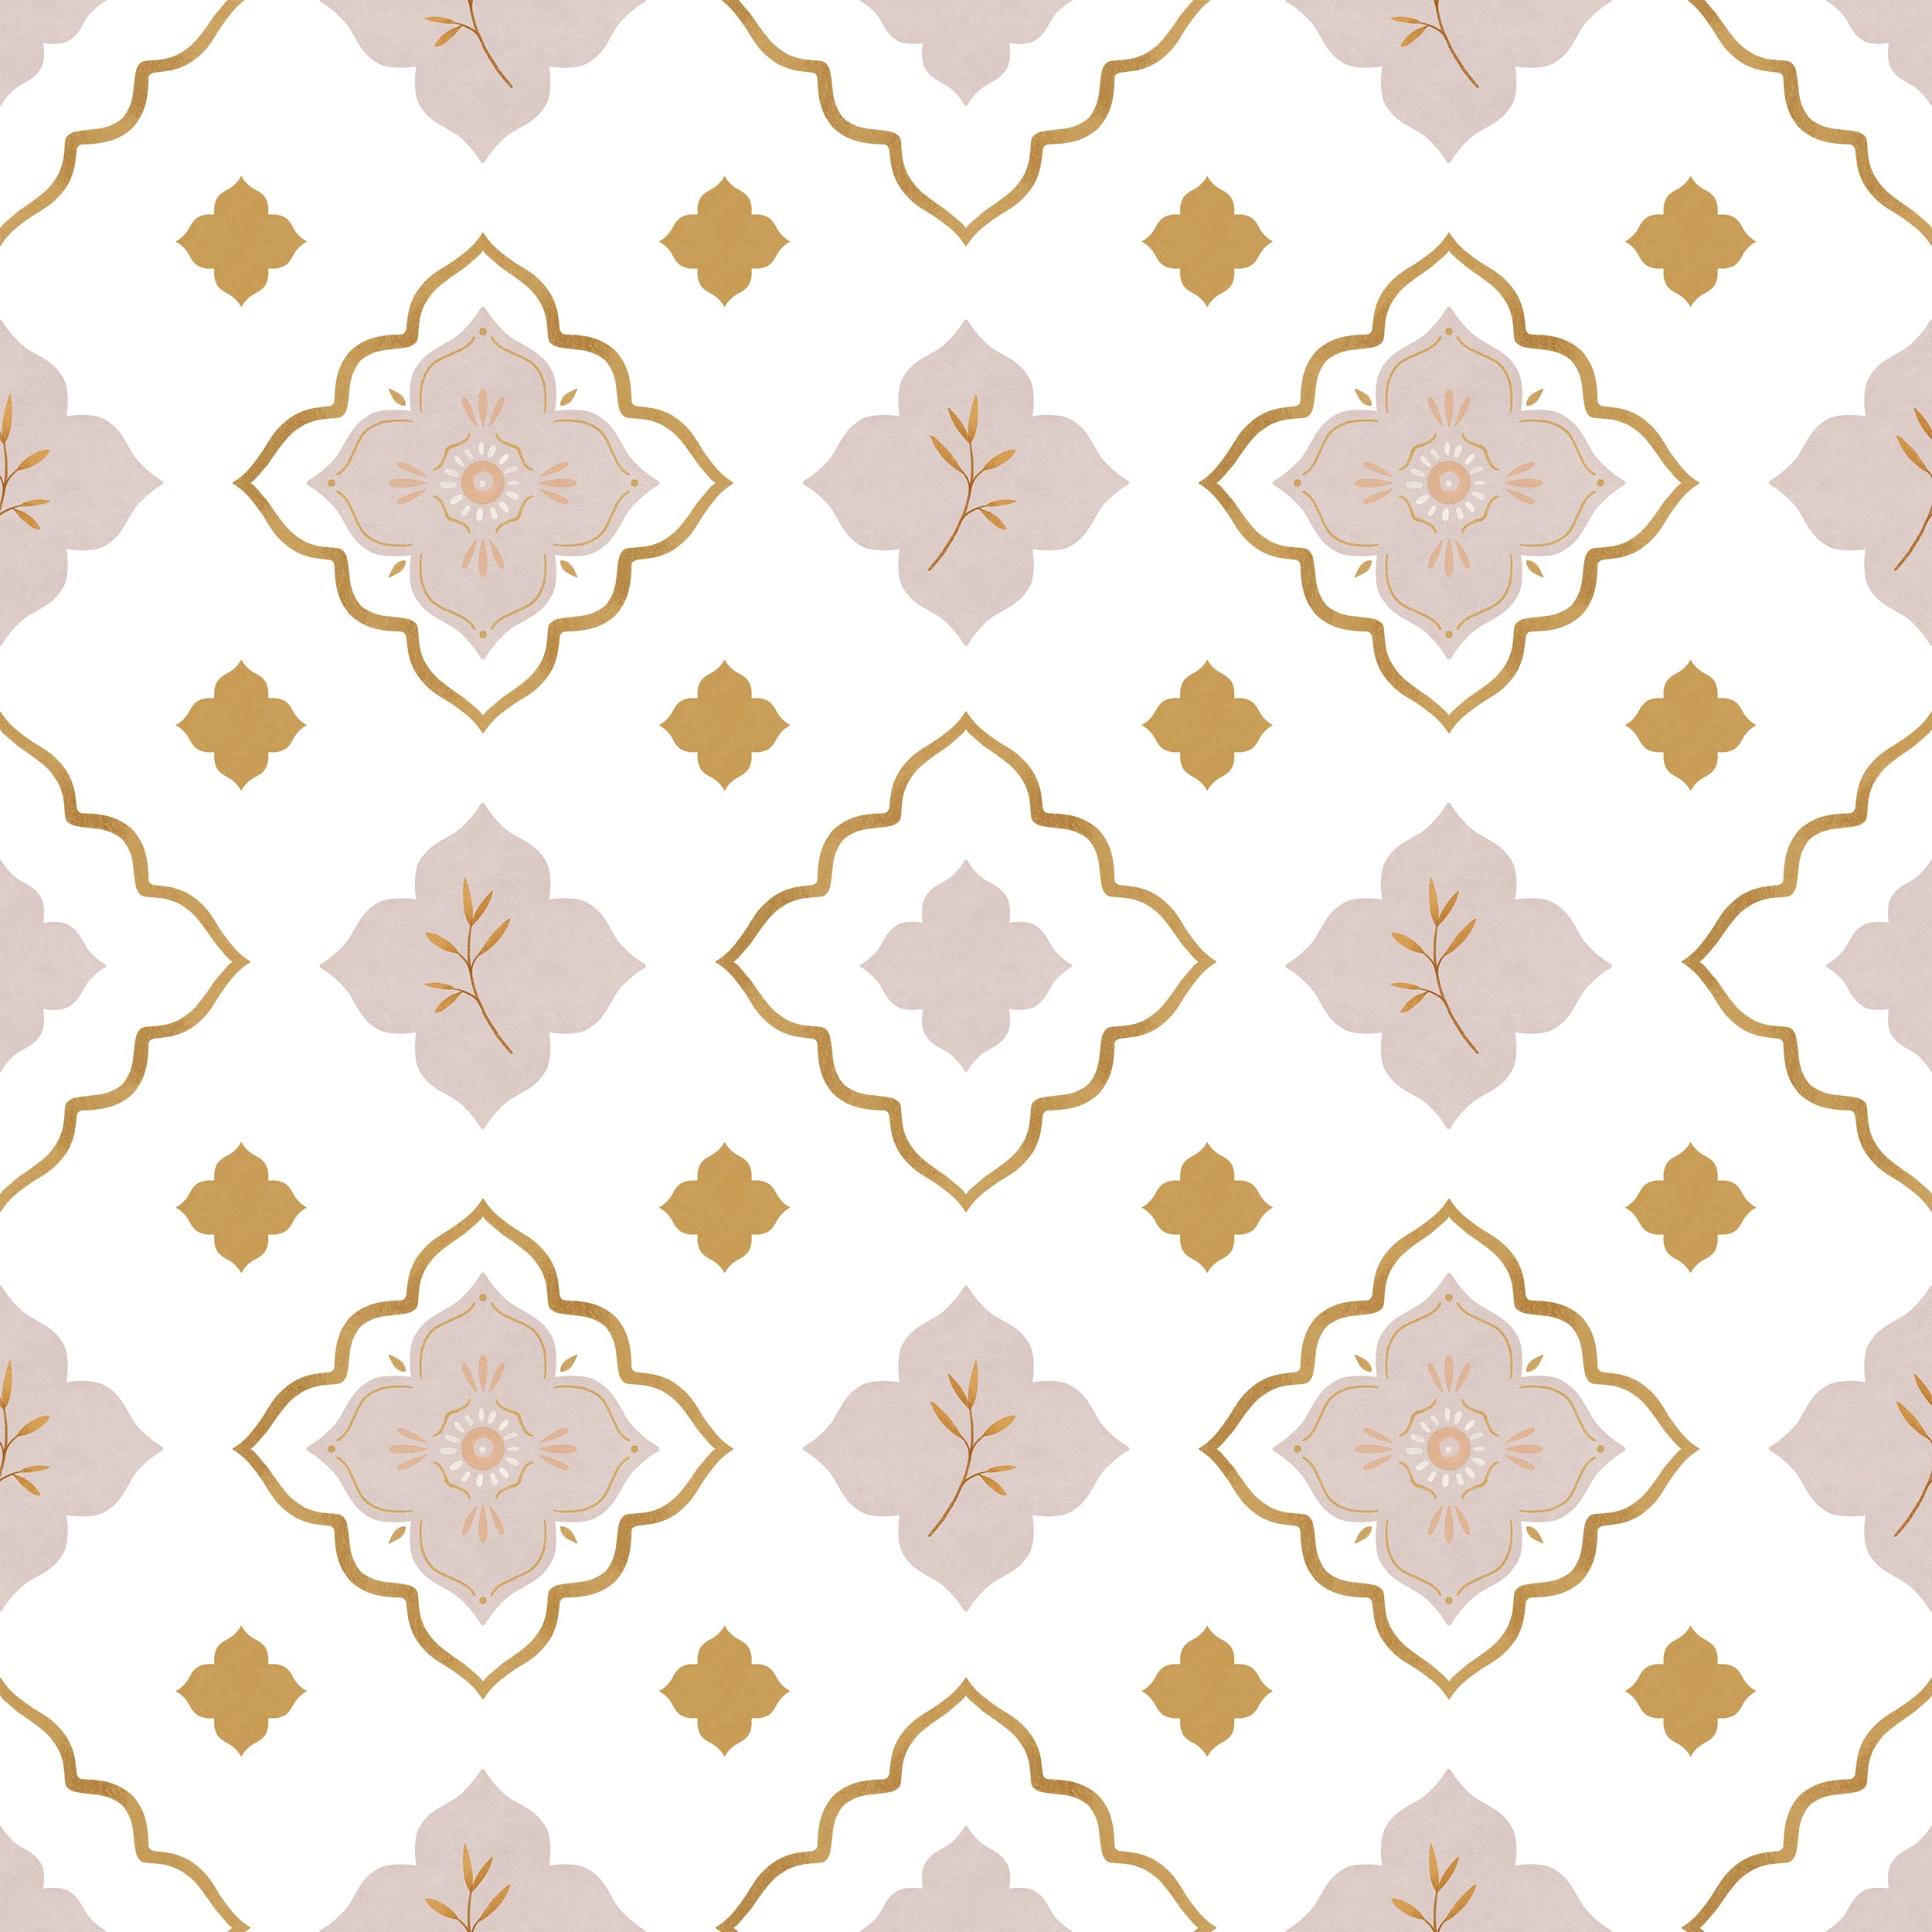 Close-up view of Moroccan Mosaic Wallpaper with an elegant design of beige, blush, and gold geometric shapes and floral motifs.